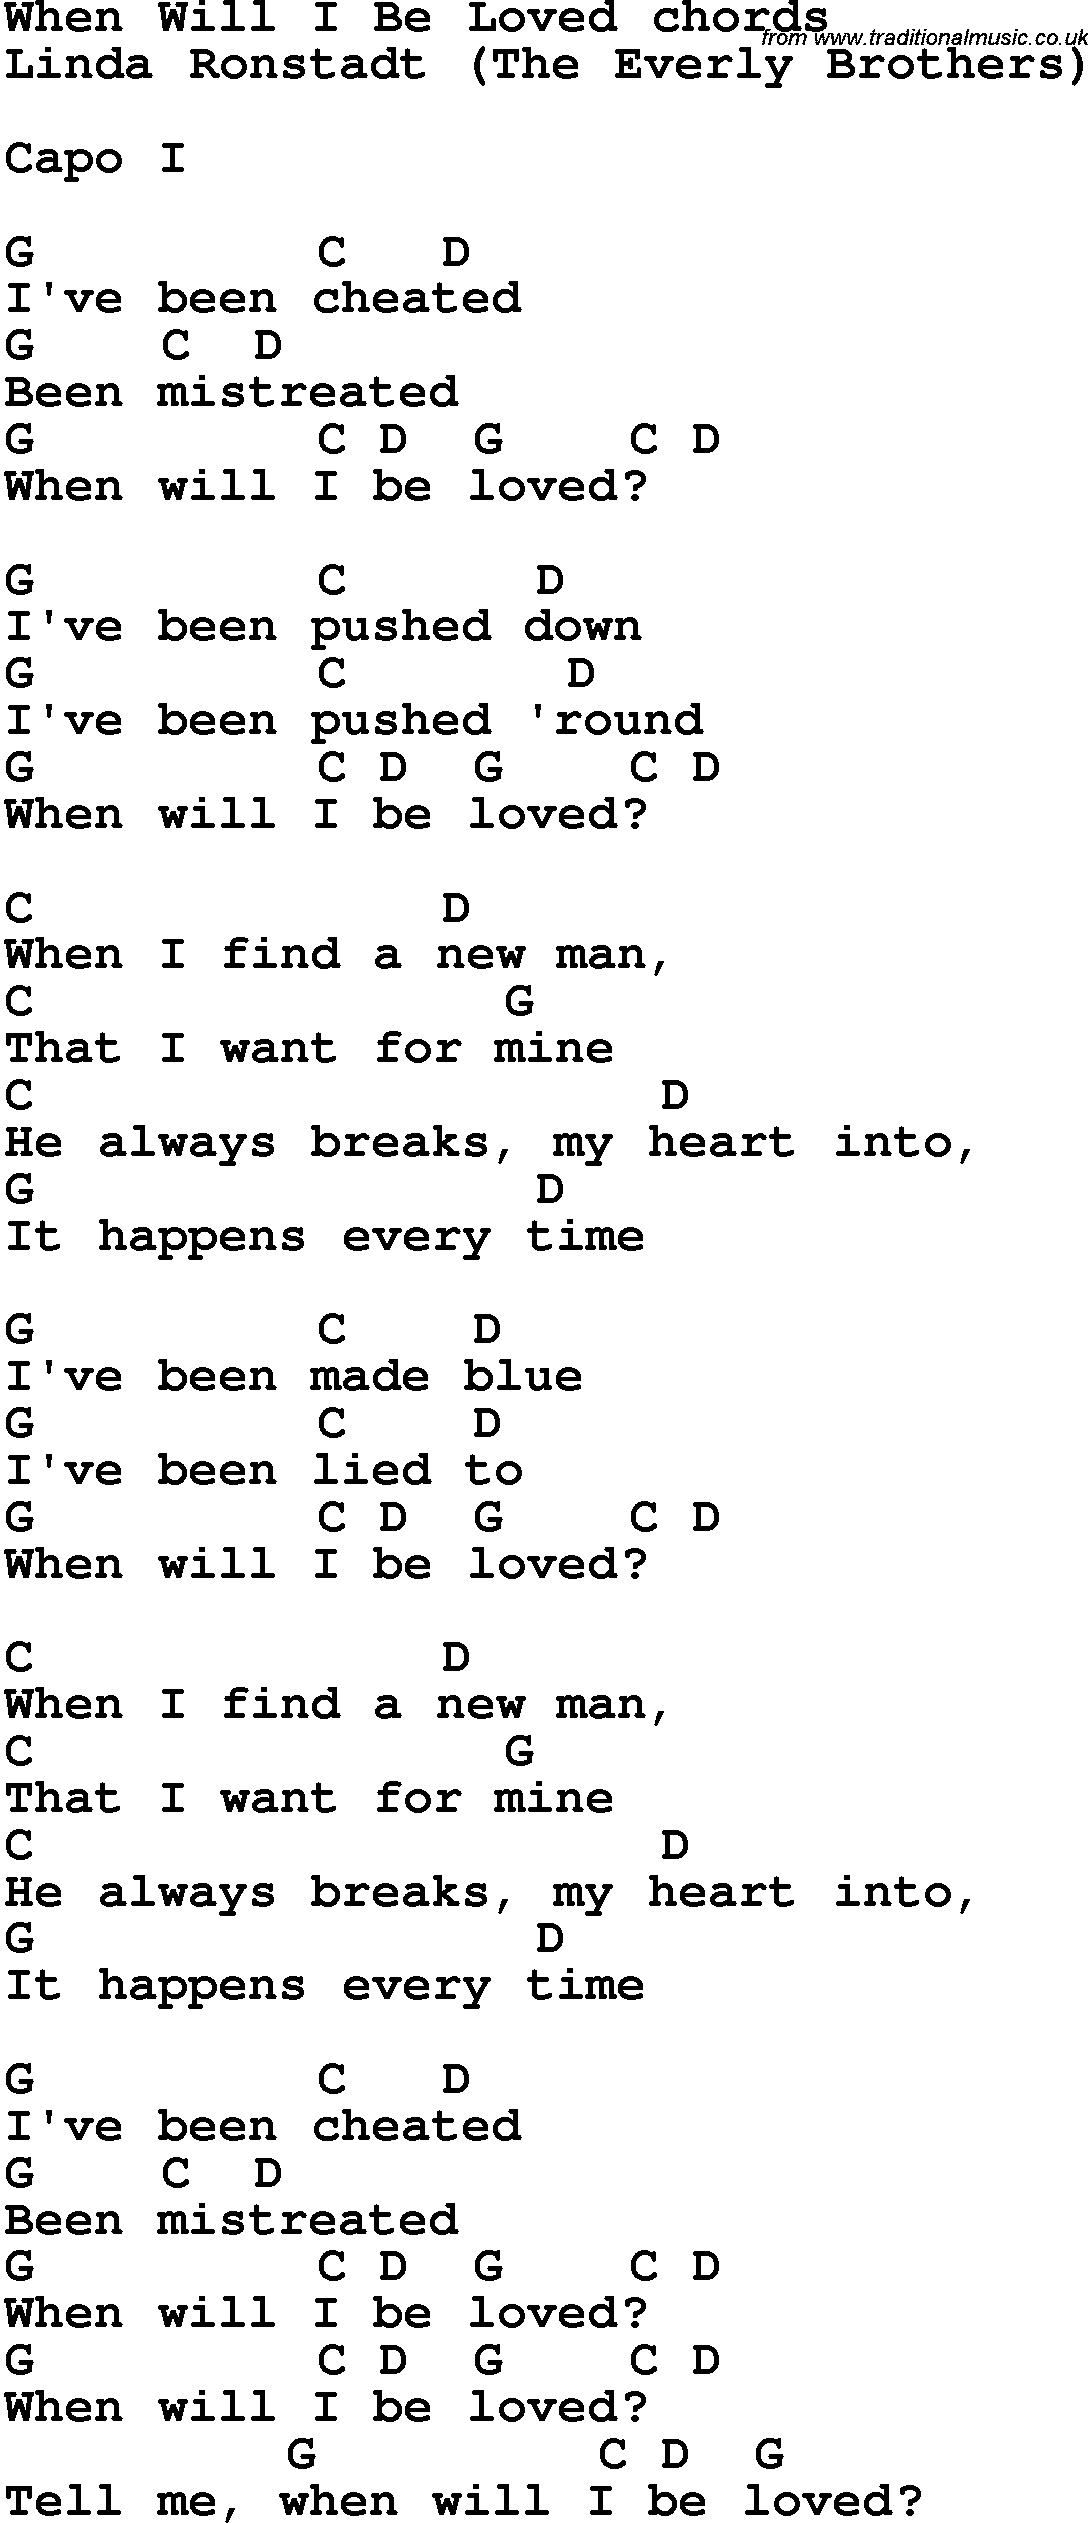 Song Lyrics with guitar chords for When Will I Be Loved - Linda Ronstadt